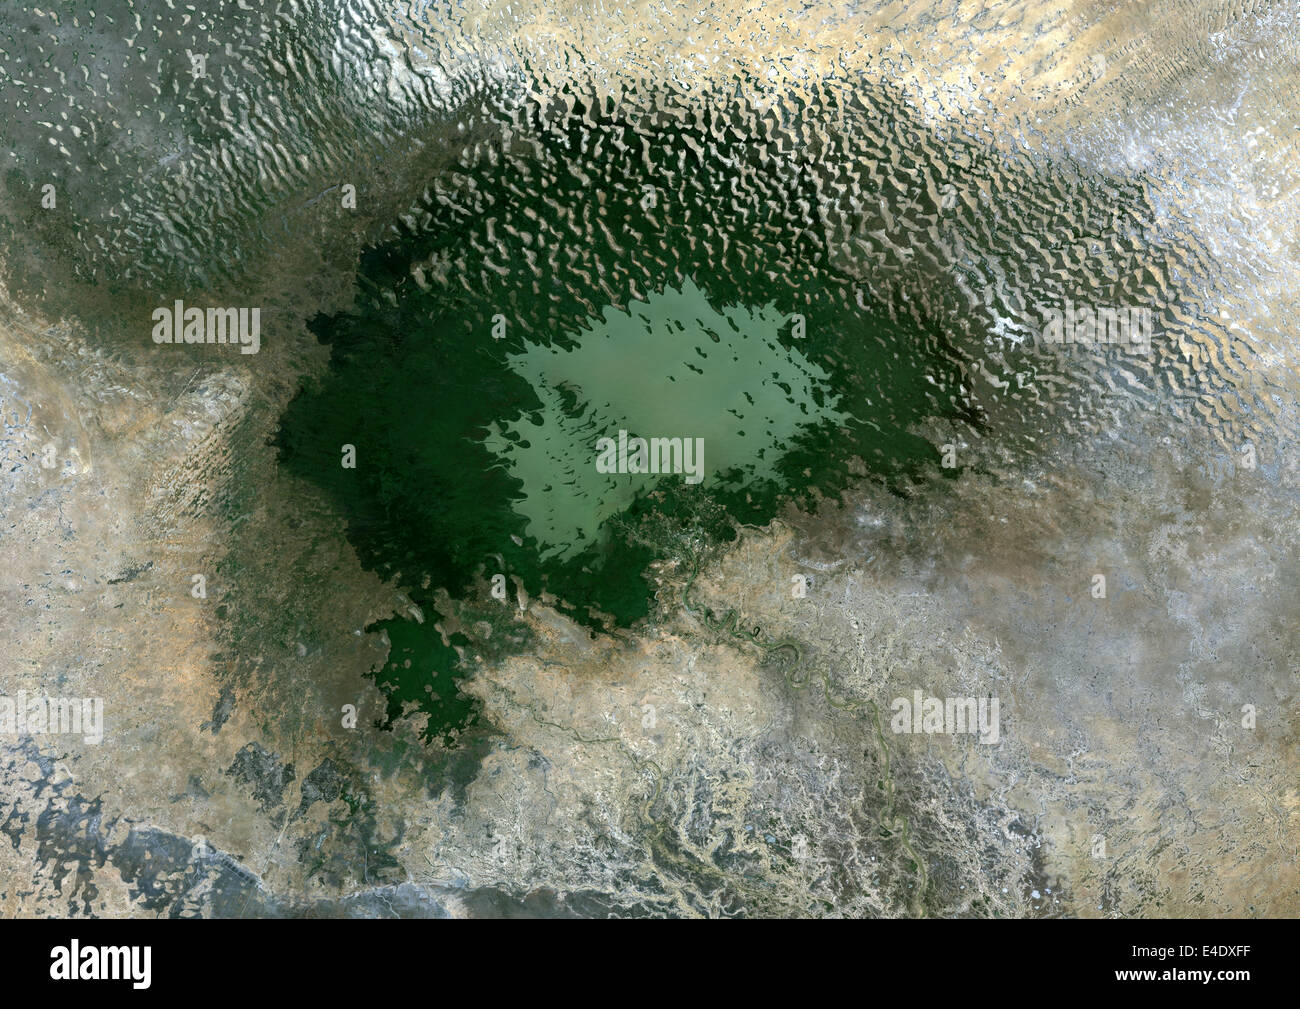 Lake Chad, Chad, In 1987, True Colour Satellite Image. True colour satellite image of Lake Chad, Chad. Image taken in 1987 using Stock Photo